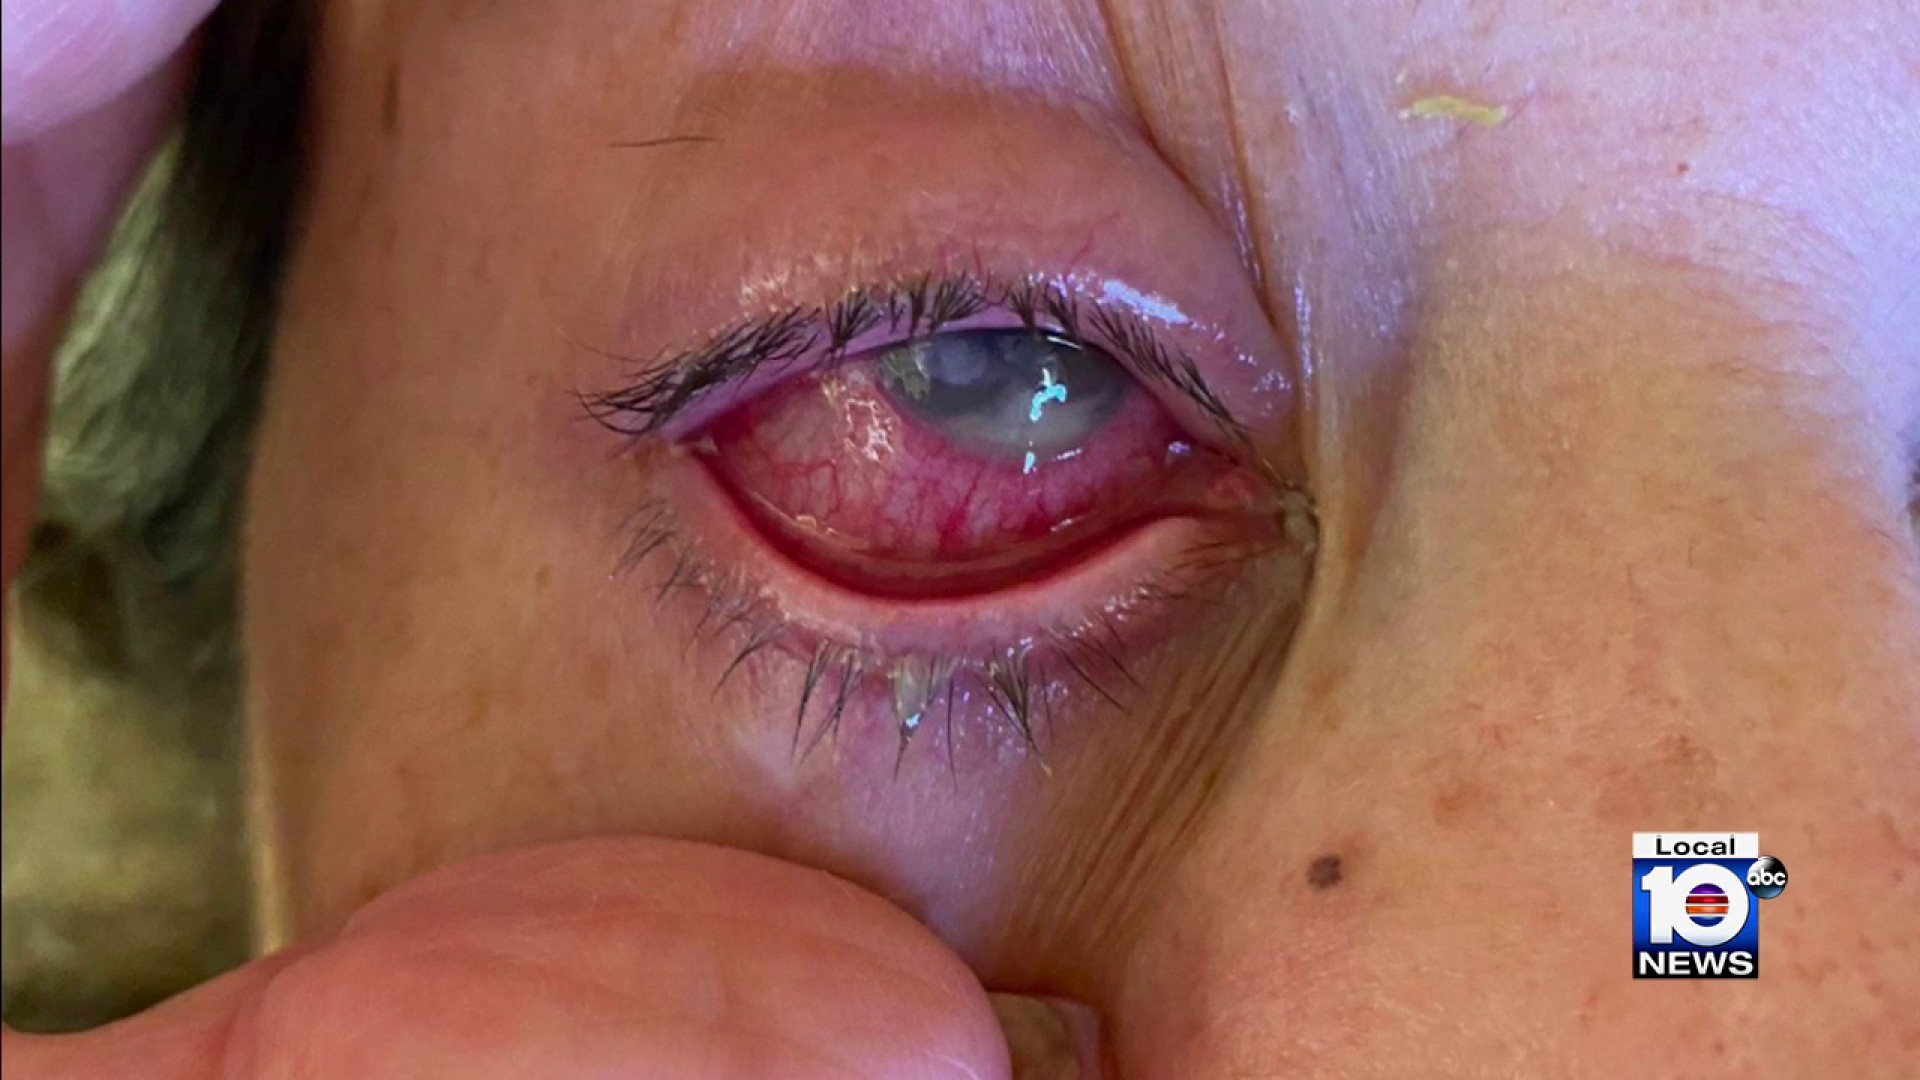 South Florida grandmother claims eyedrops caused blindness